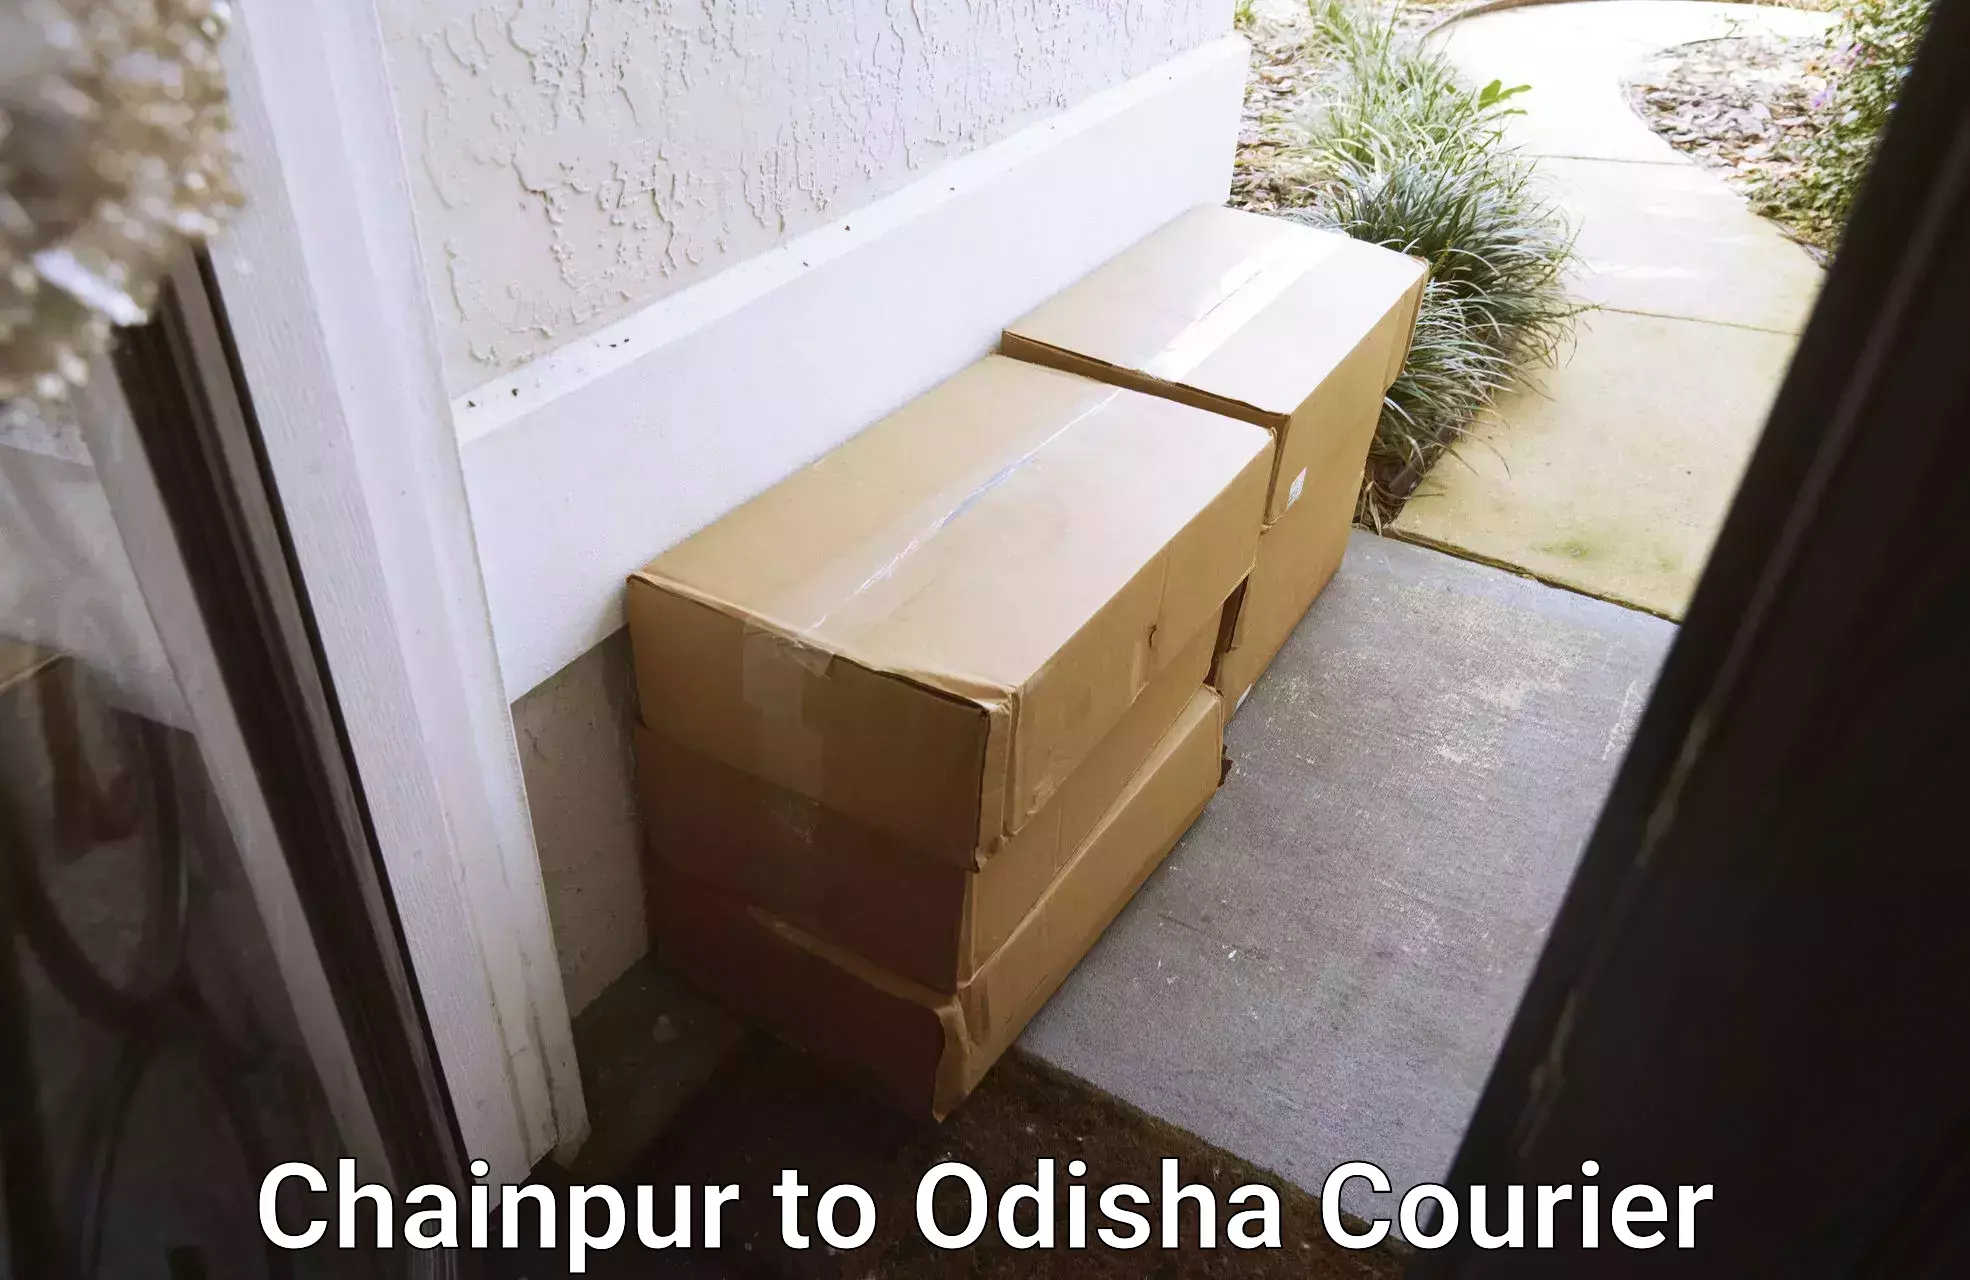 Moving and packing experts Chainpur to Odisha